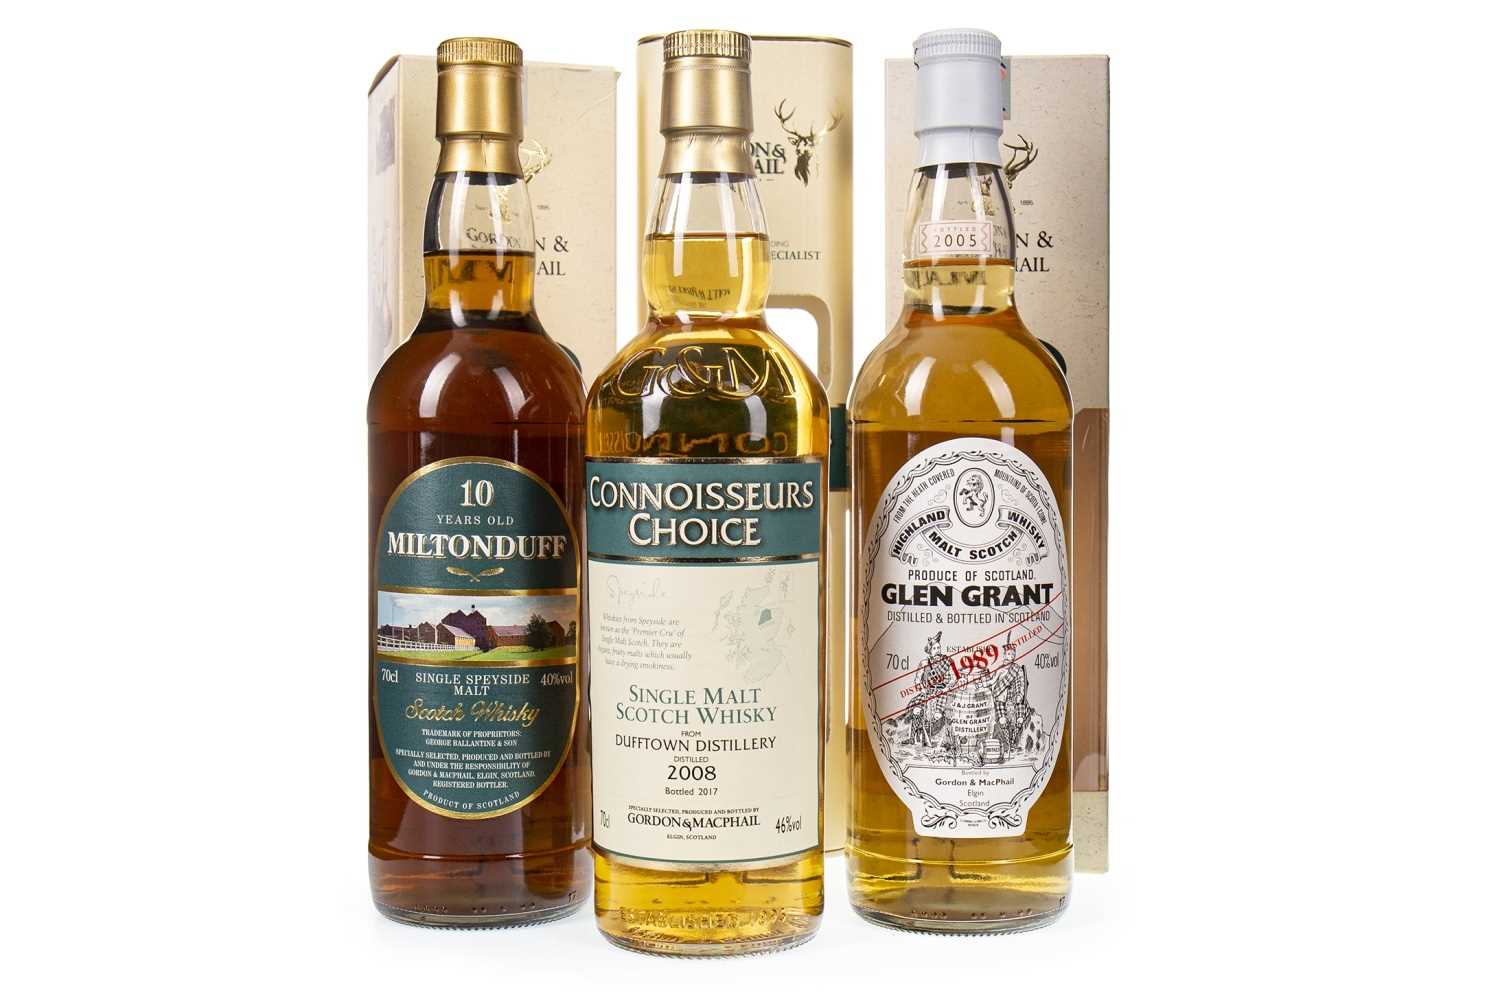 Lot 326 - GLEN GRANT 1989, DUFFTOWN 2008 CONNOISSEURS CHOICE AND MILTONDUFF 10 YEARS OLD